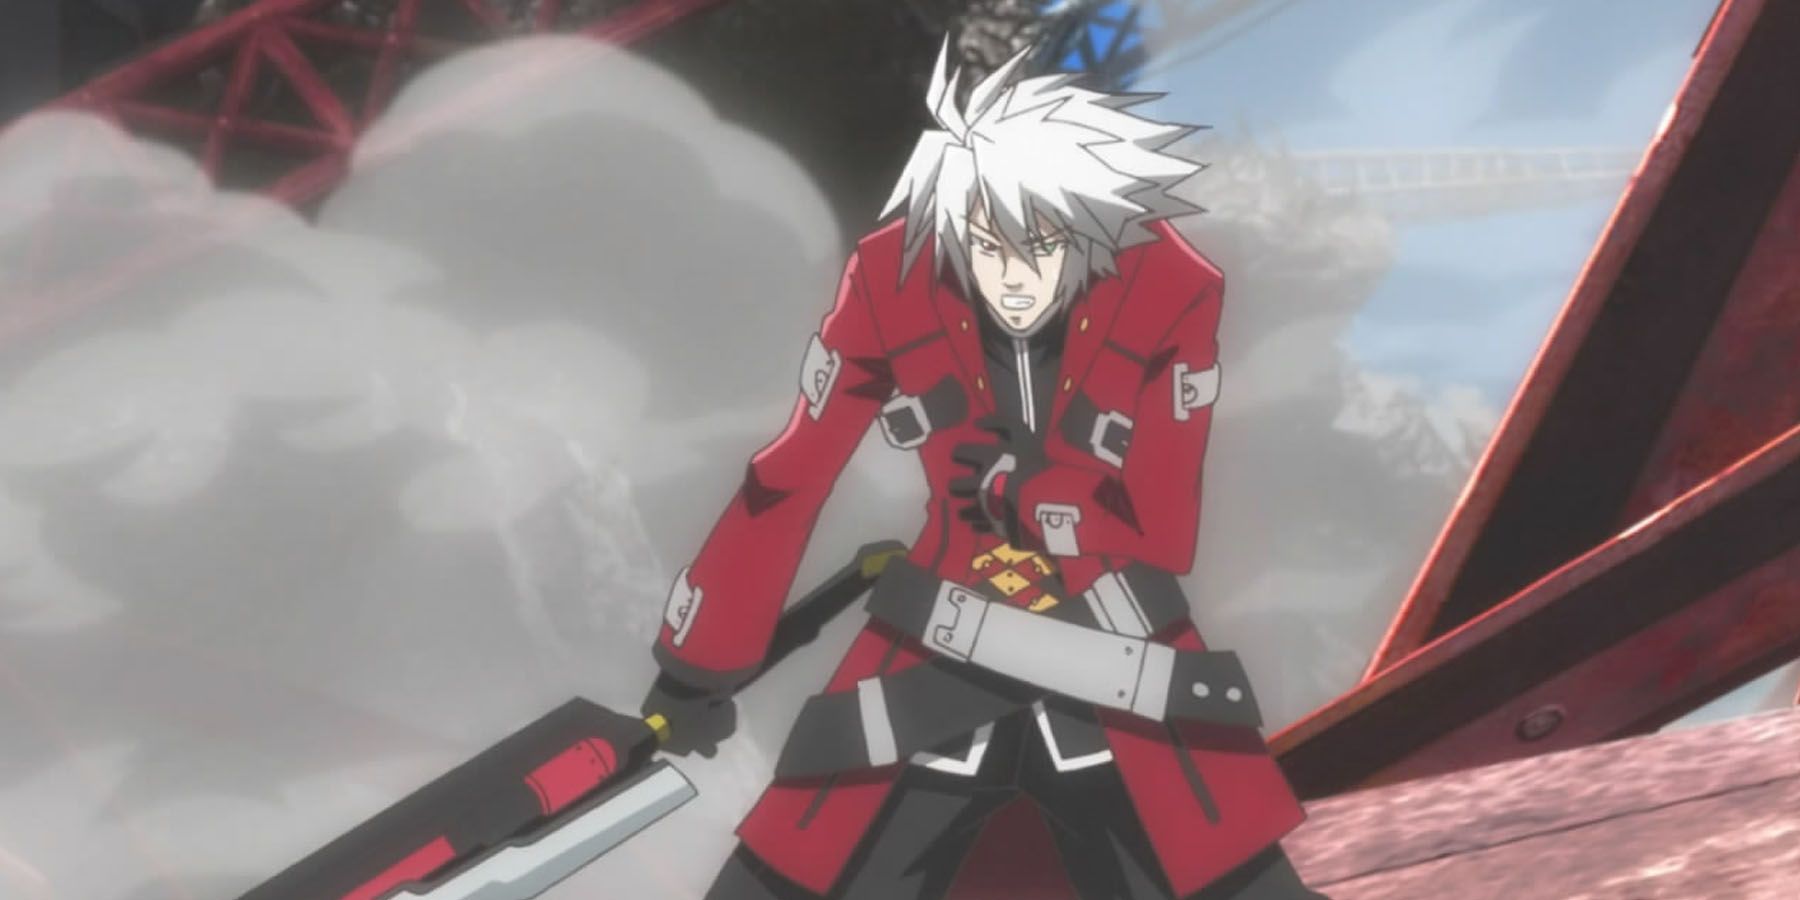 Ragna fighting in the post-apocalyptic world of BlazBlue